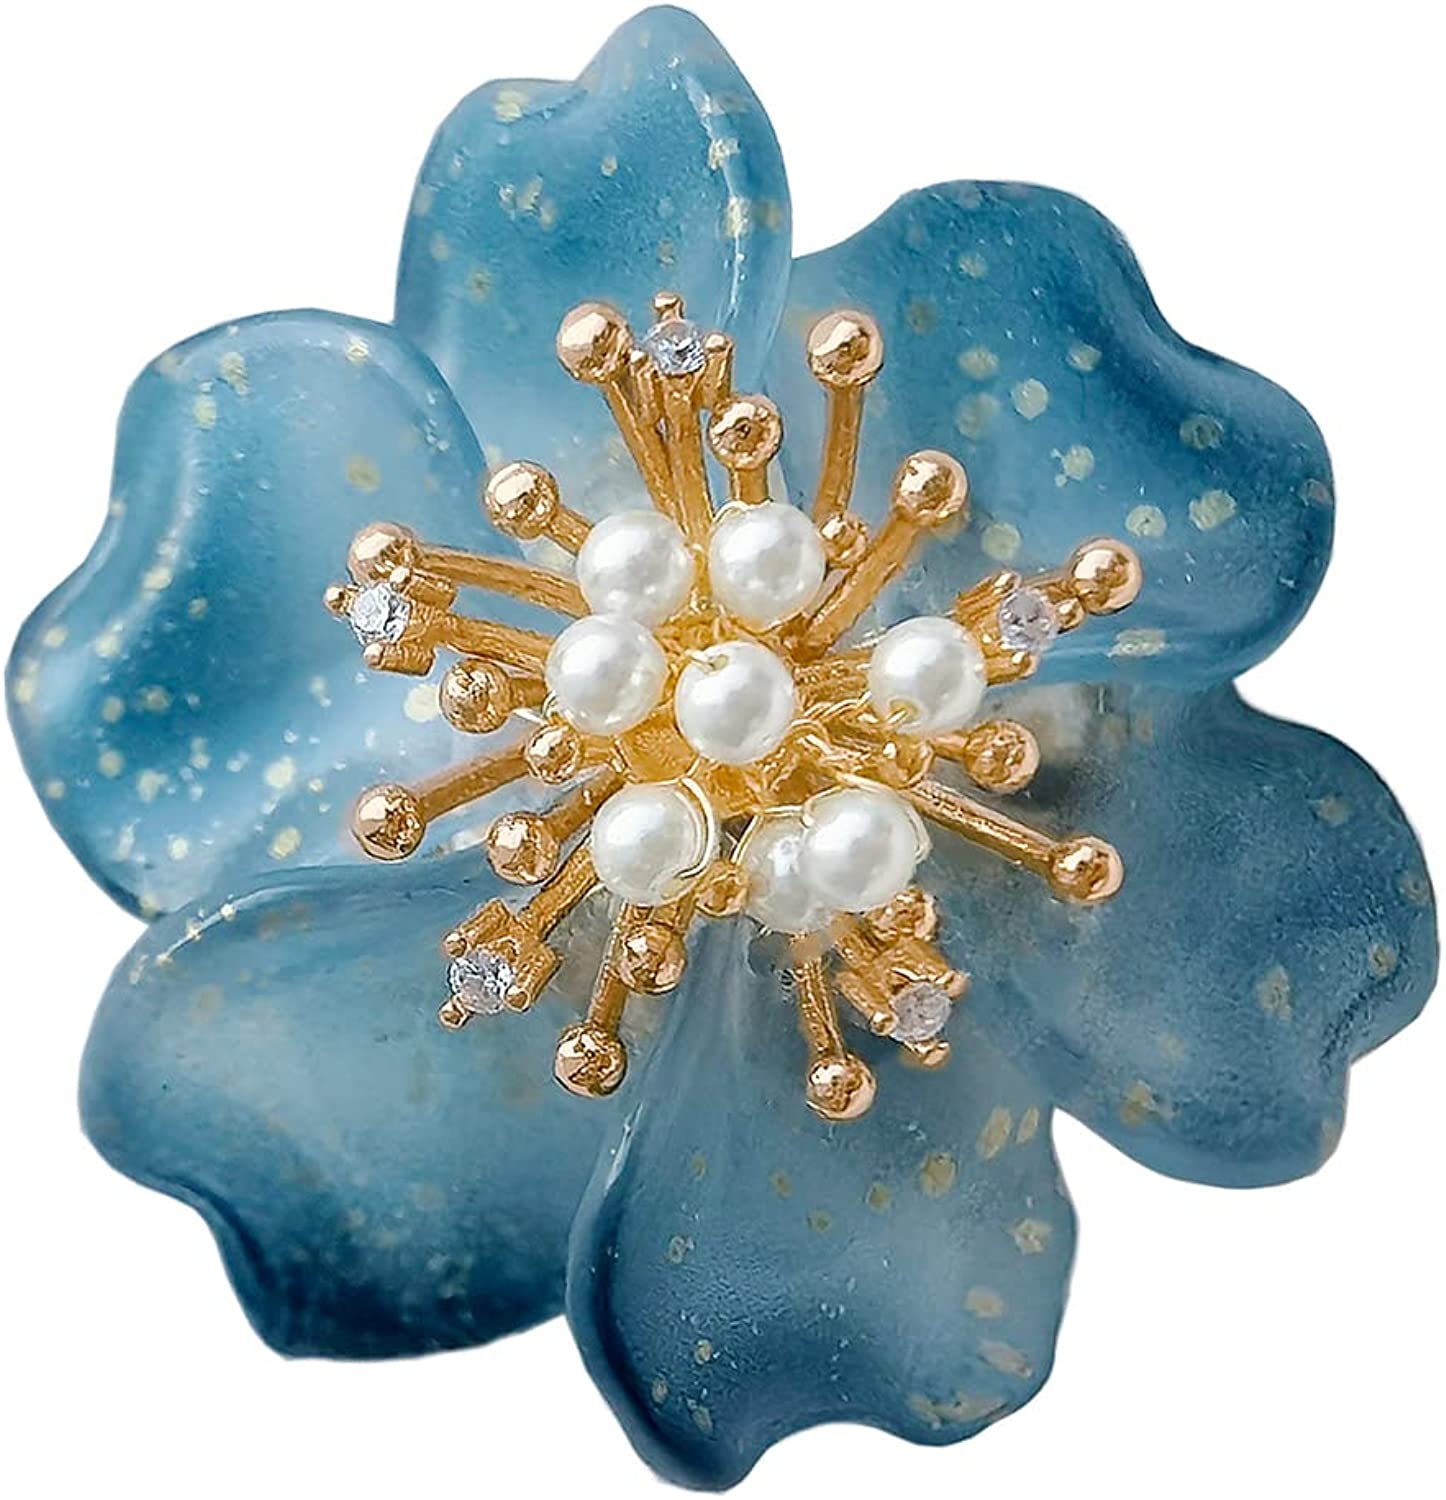 CCijiNG Flower Brooch Pins for Women Girl Fashion Crystal/Colored Glaze Floral Blooming Lapel Pin Pearl Safety Pin Wedding Party Gifts for Mother's Day